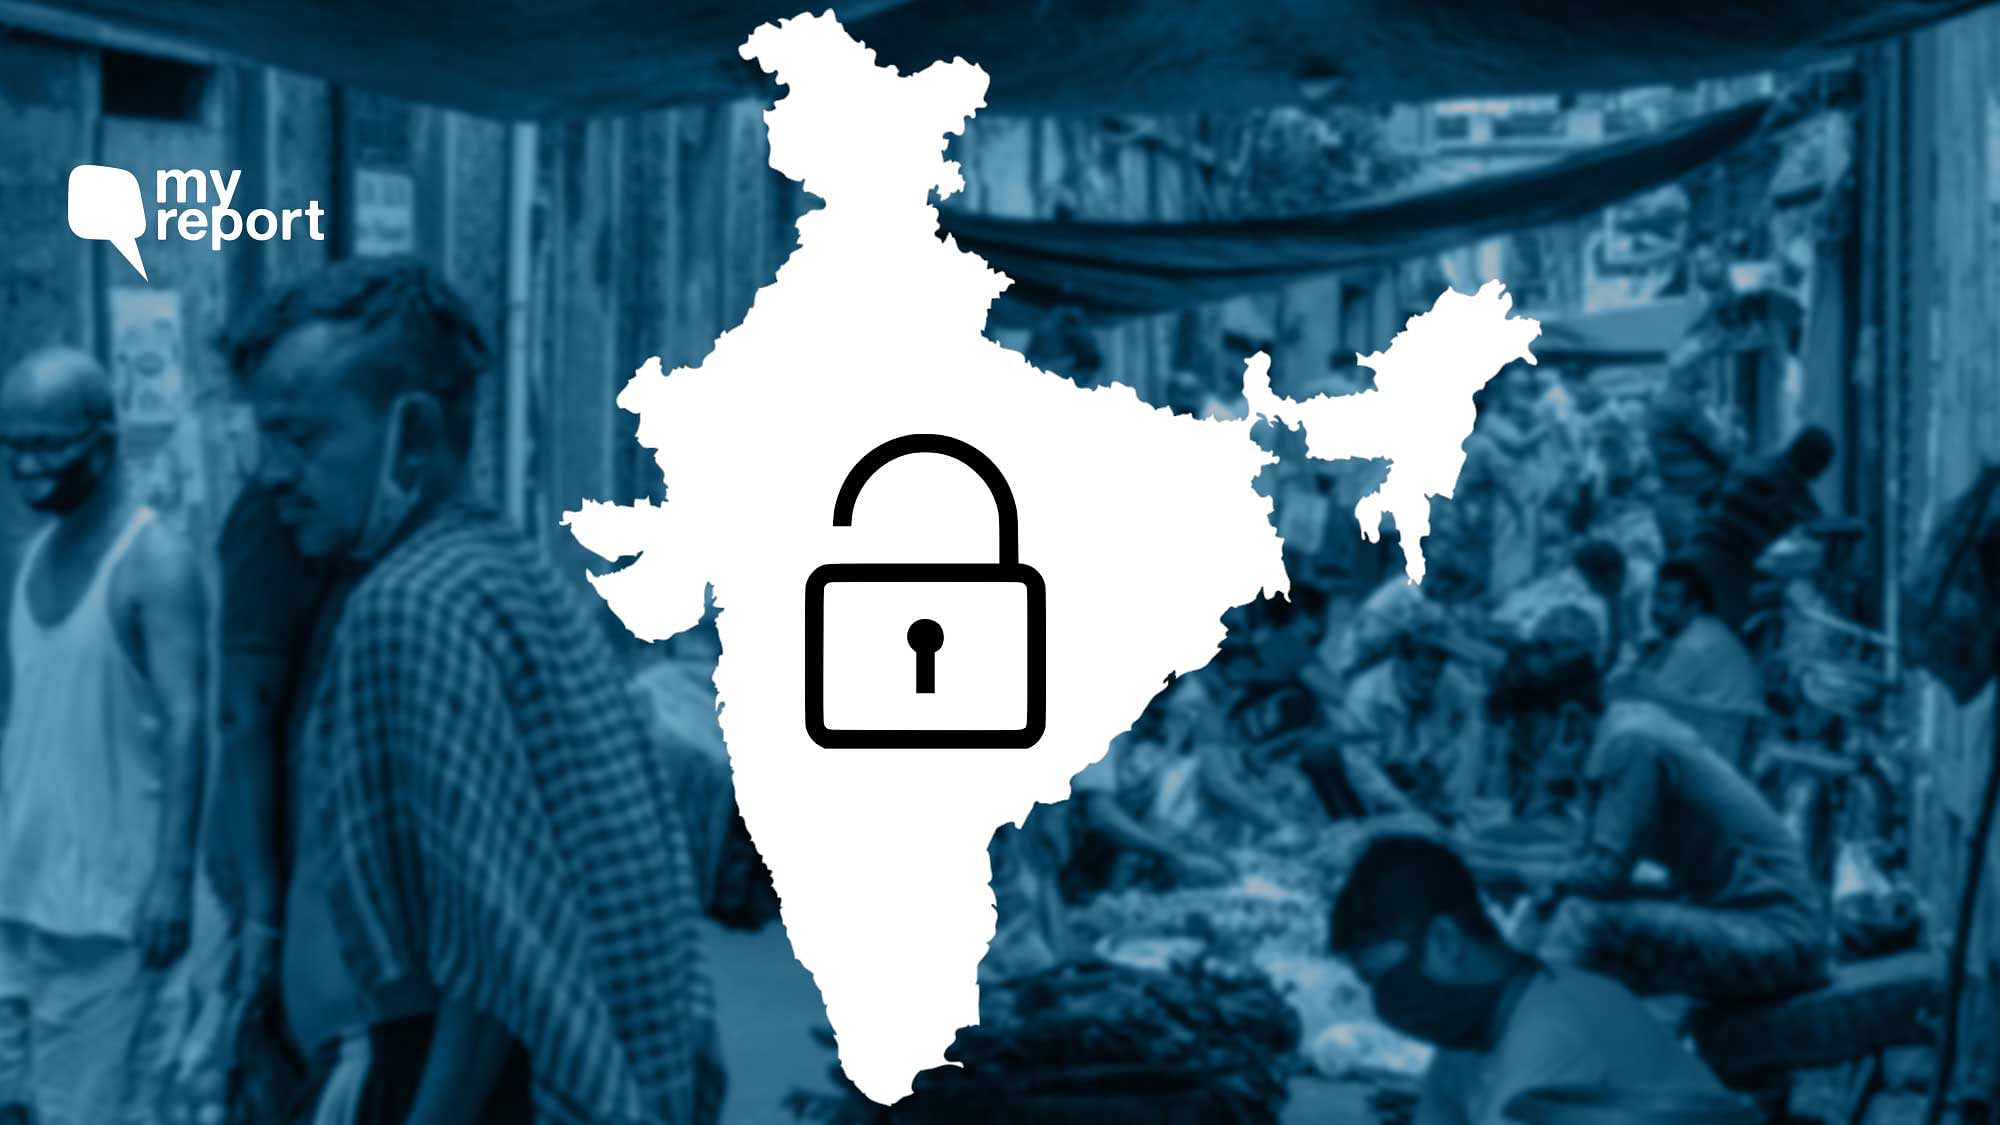 As India unlocks after a deadly second wave, citizen journalists check if COVID-appropriate rules are being followed.